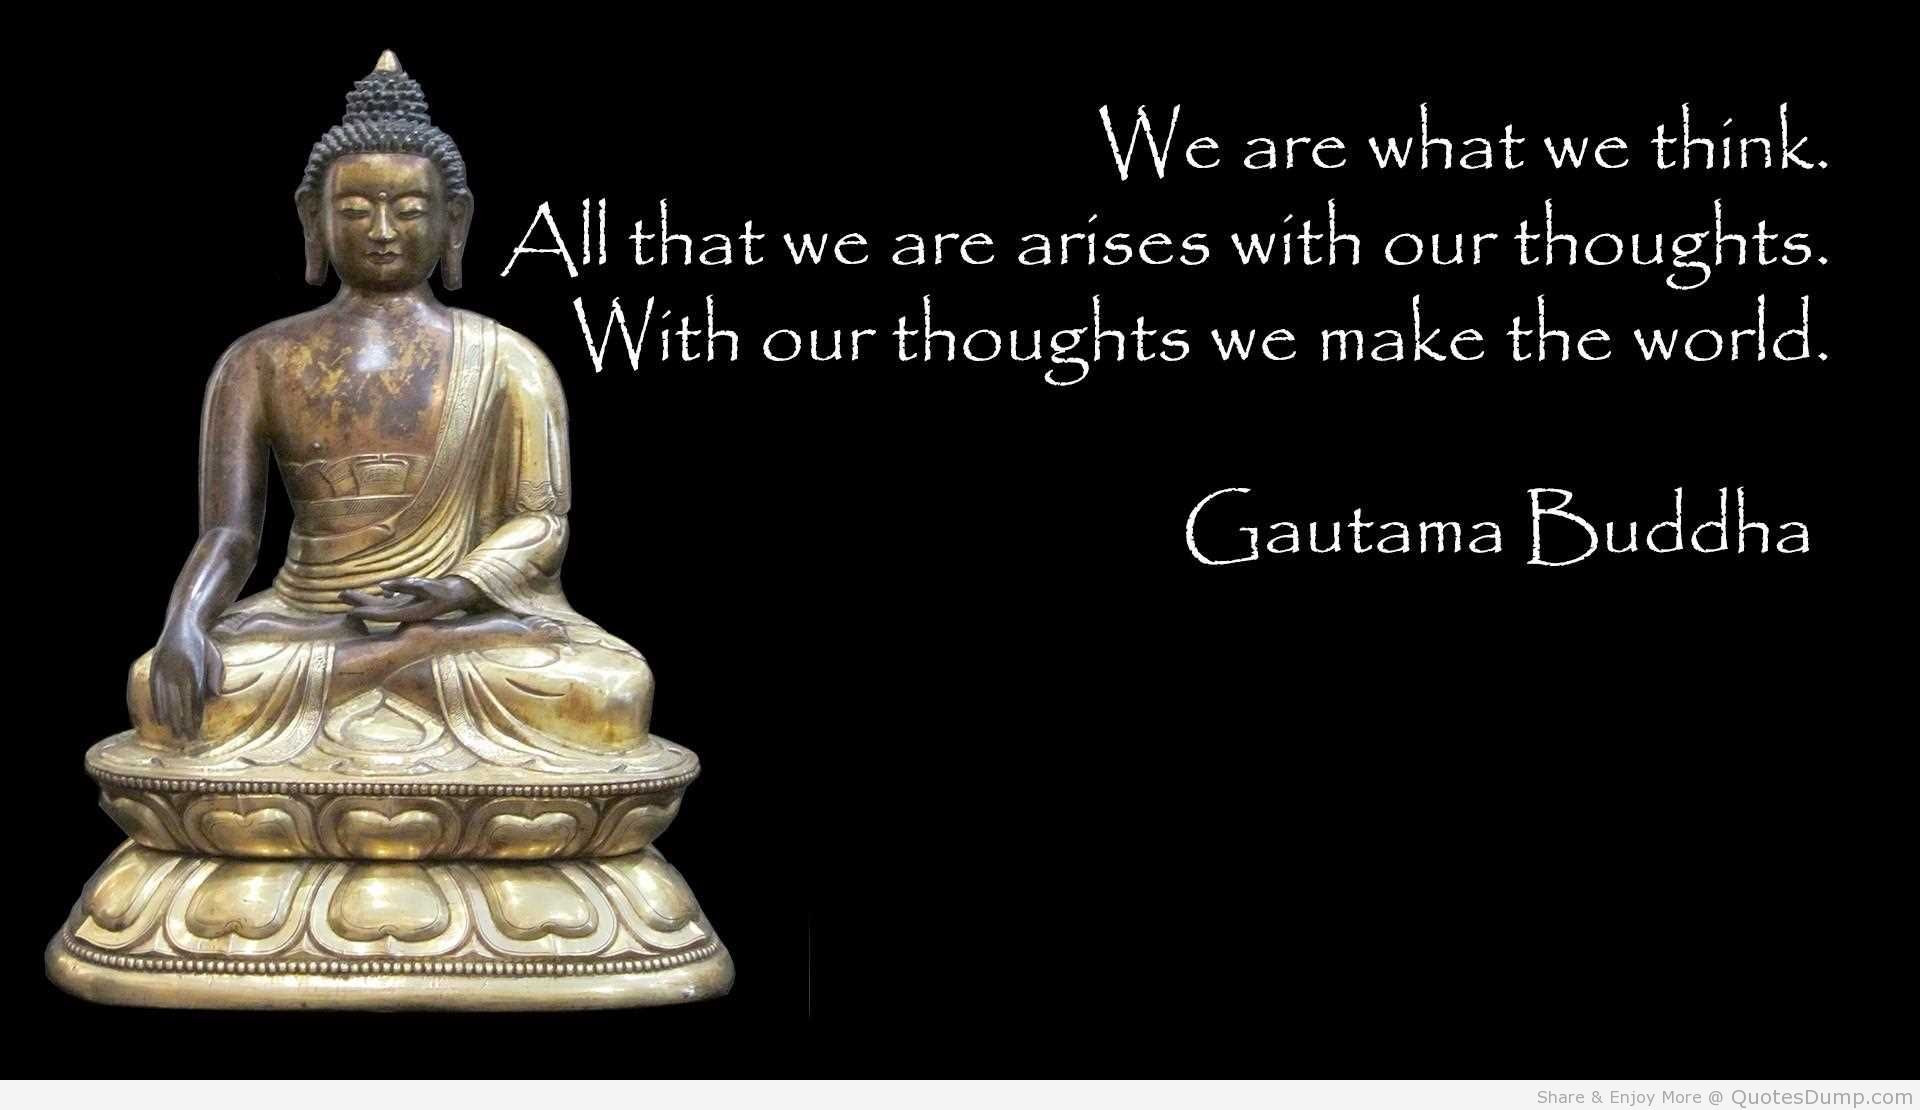 Buddha Quote About Life
 Buddha Quotes About Life QuotesGram